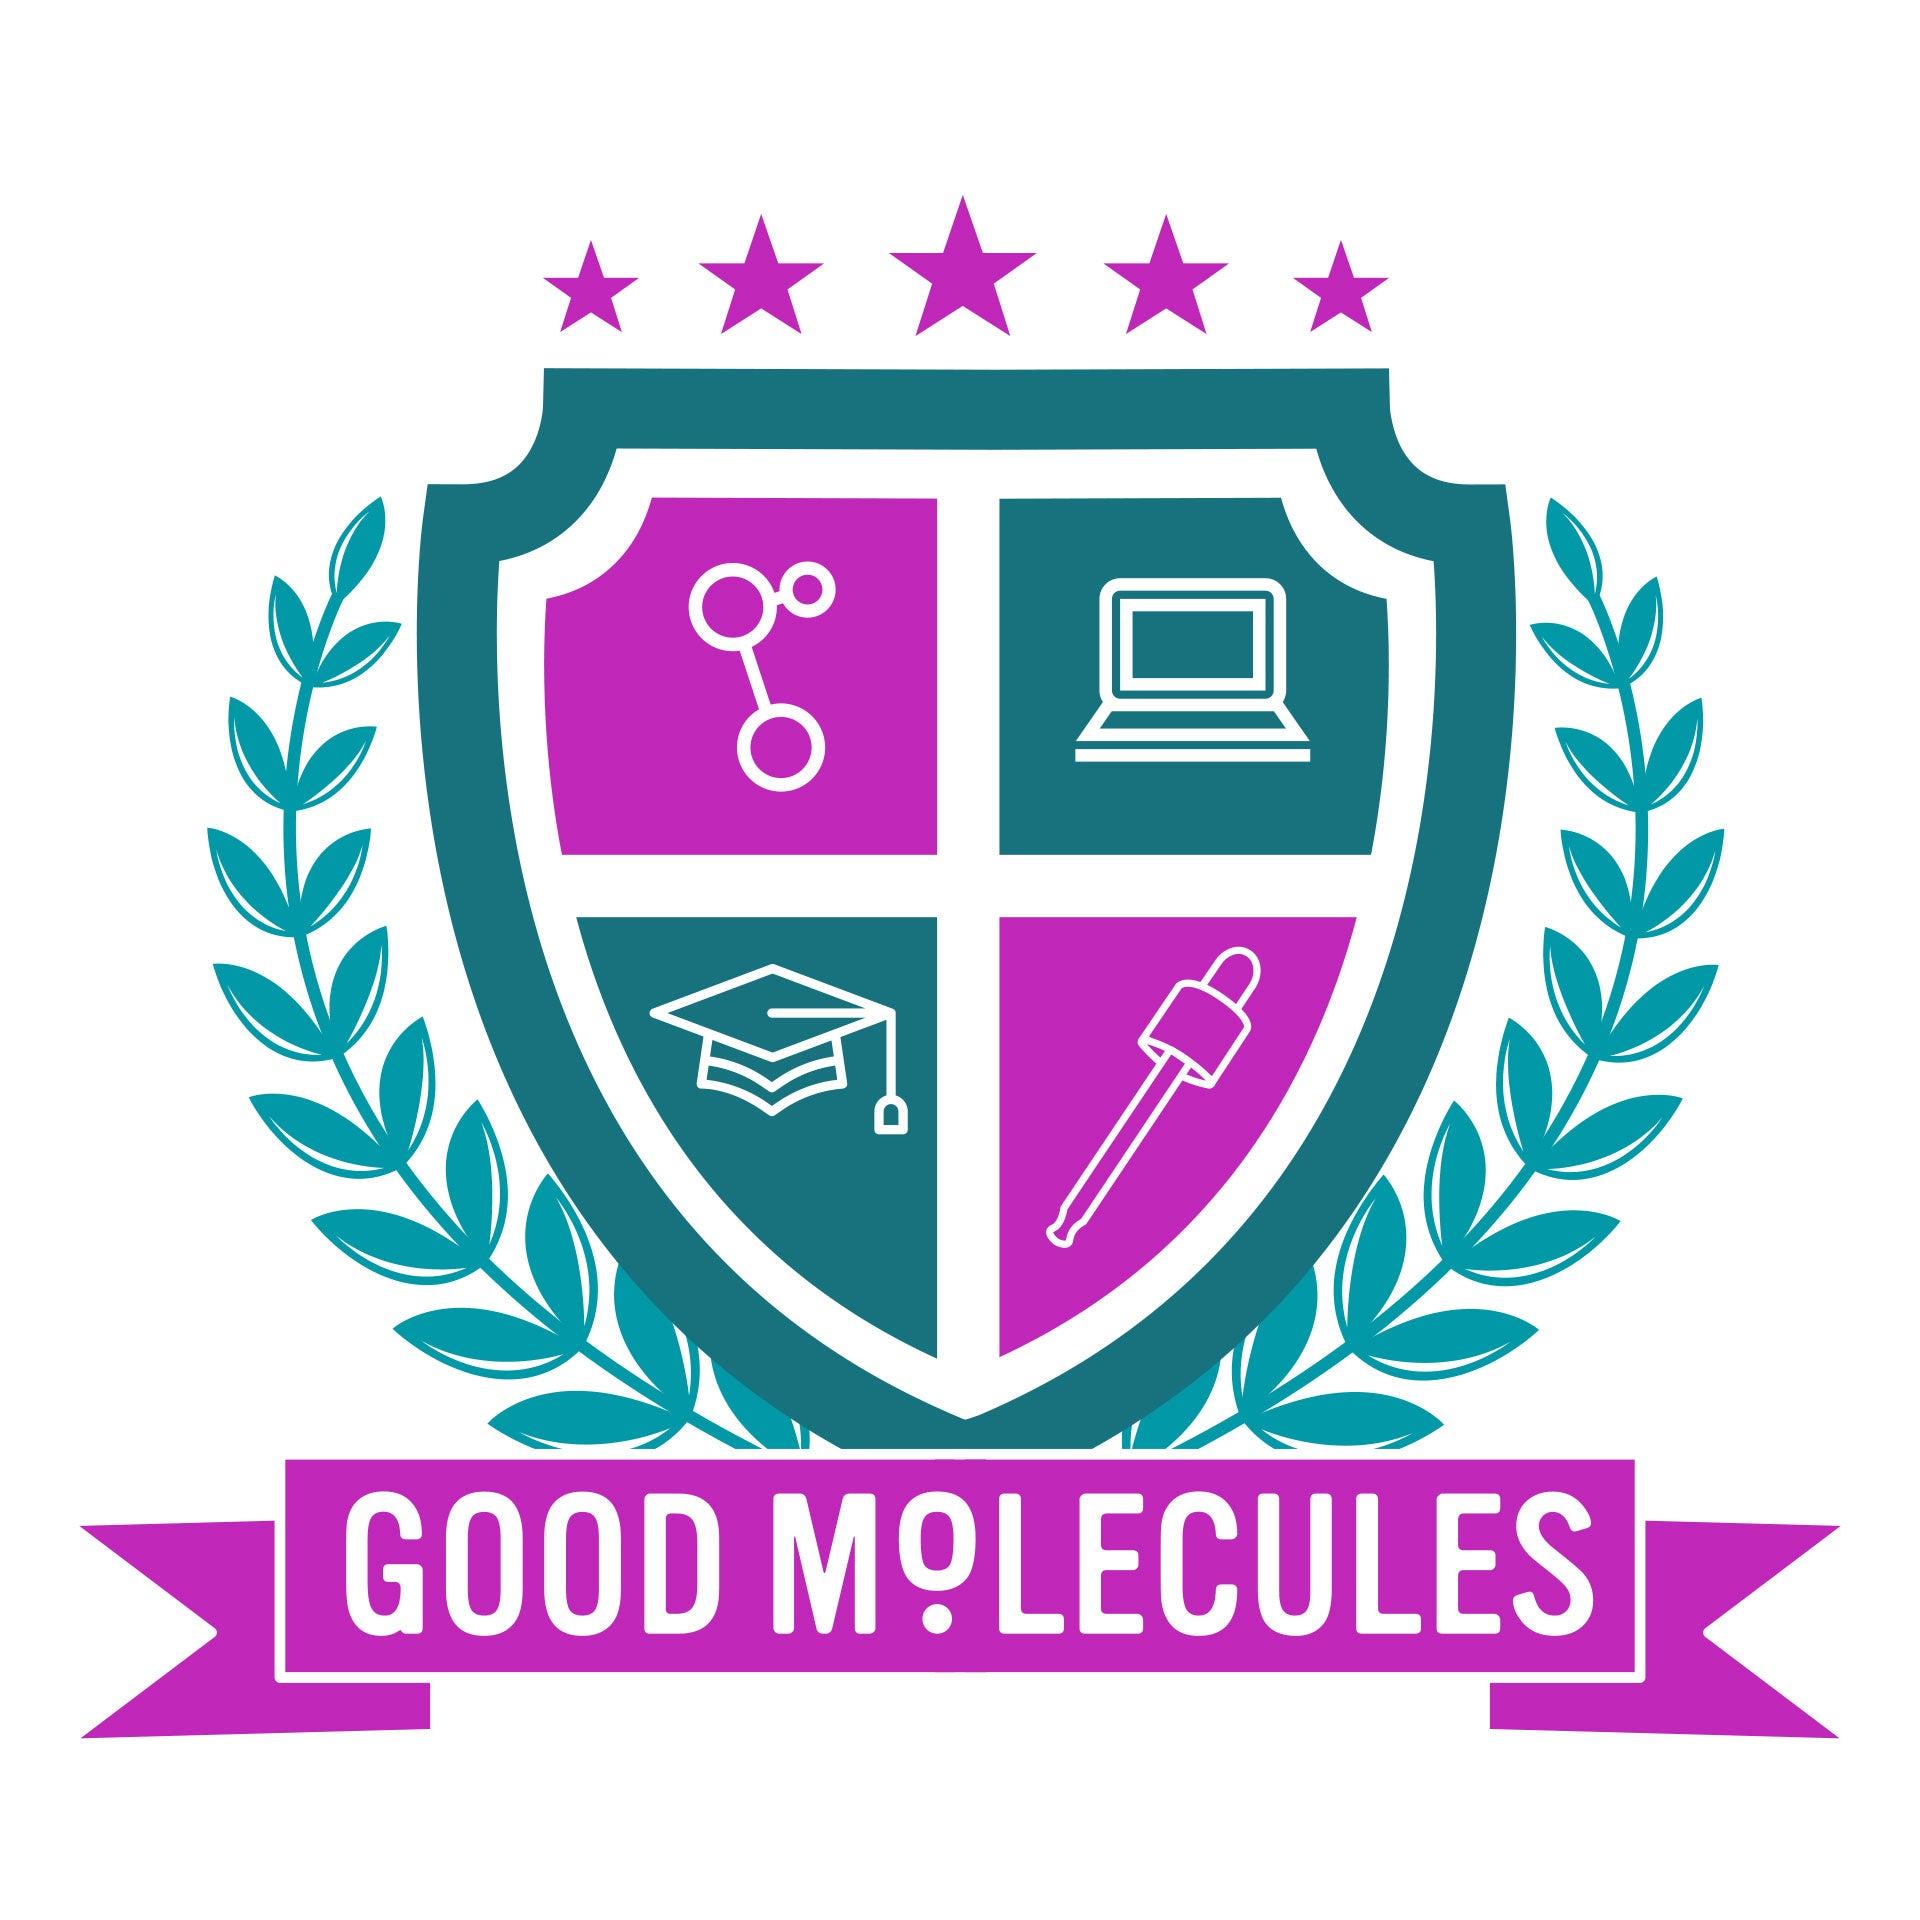 Good molecules is coming to the University of Miami! 